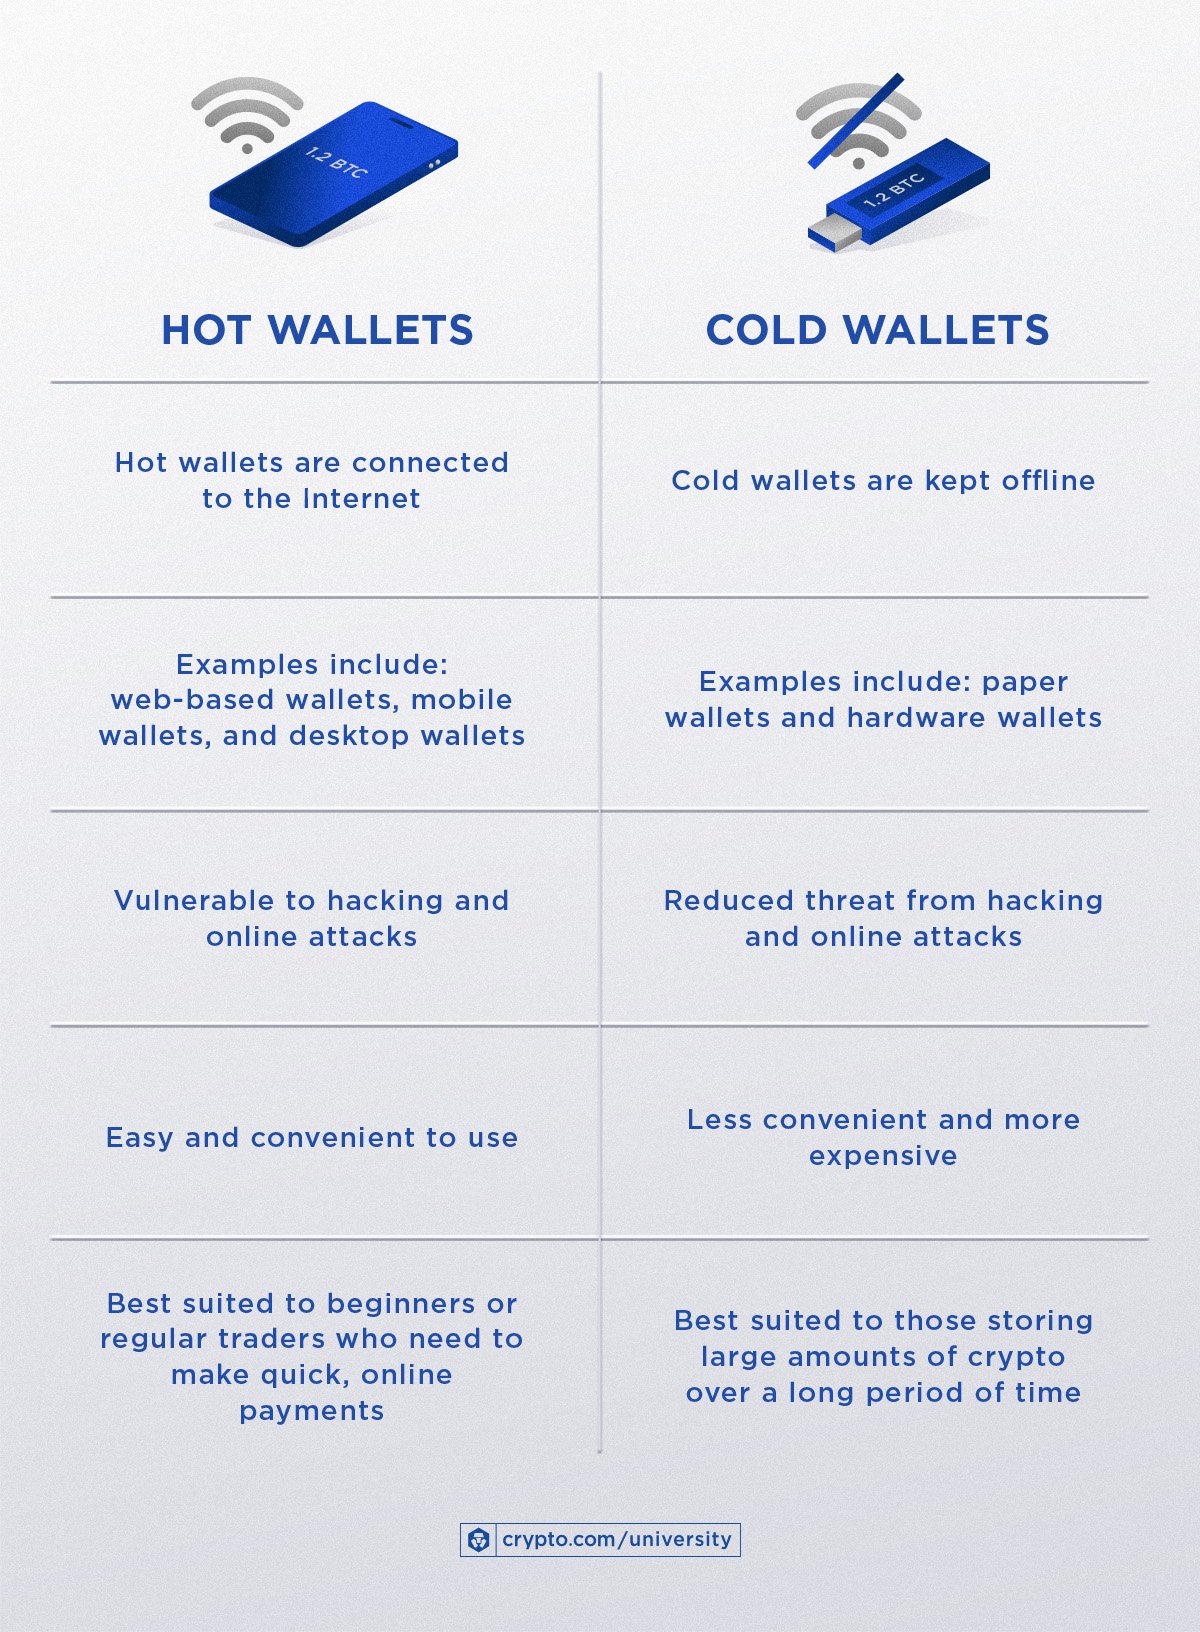 bitcoinhelp.fun DeFi Wallet Review Pros, Cons and How It Compares - NerdWallet